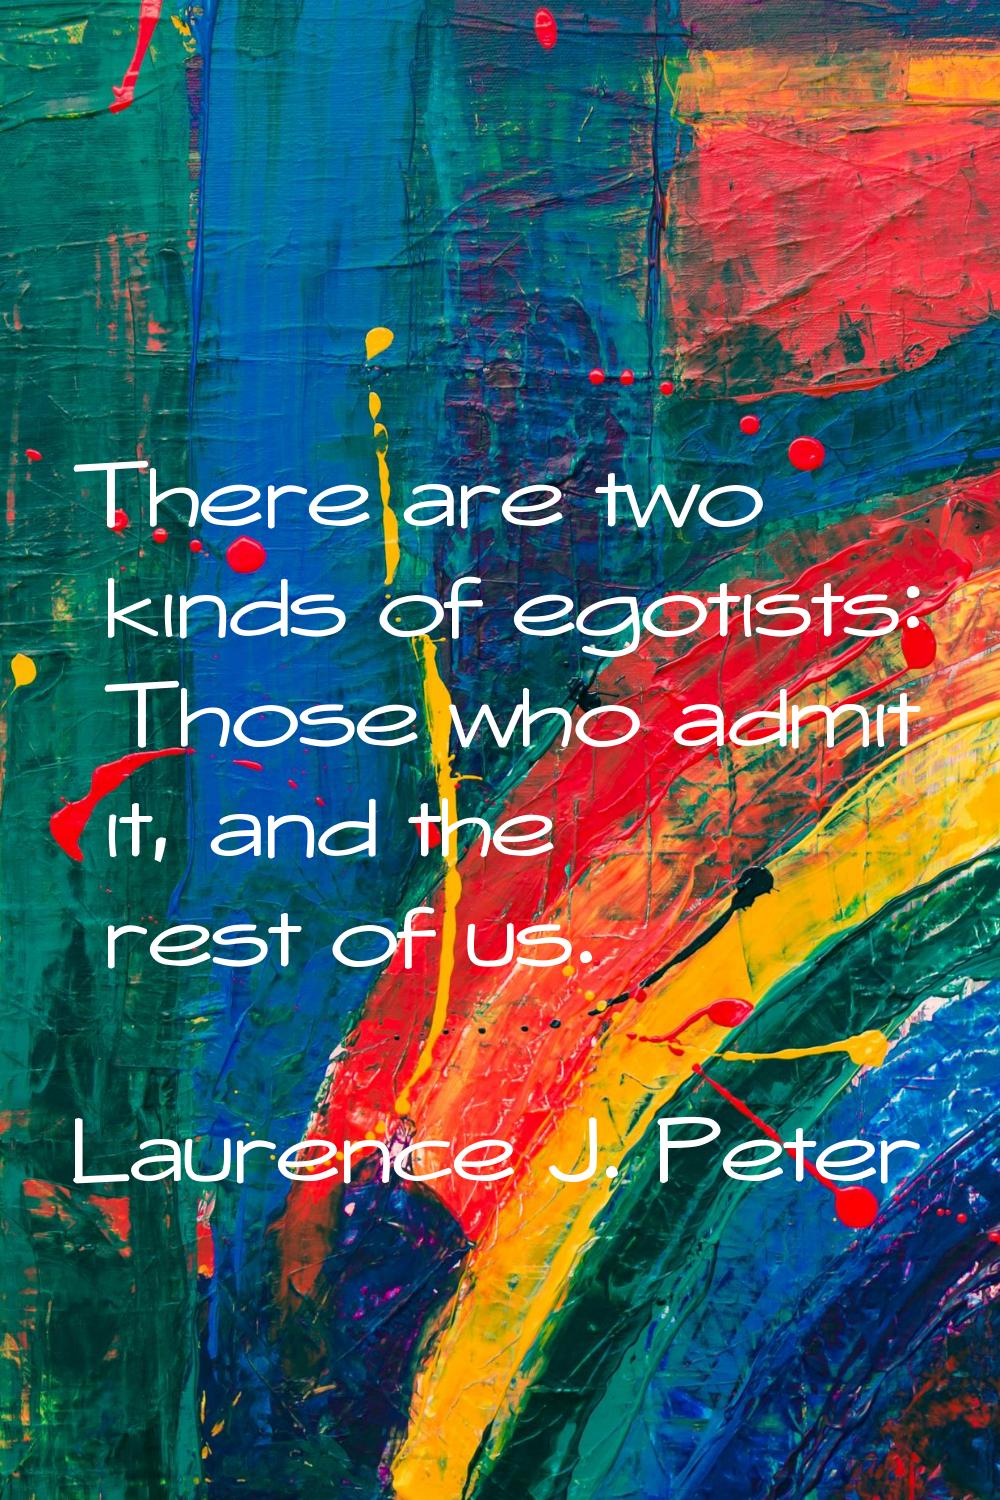 There are two kinds of egotists: Those who admit it, and the rest of us.